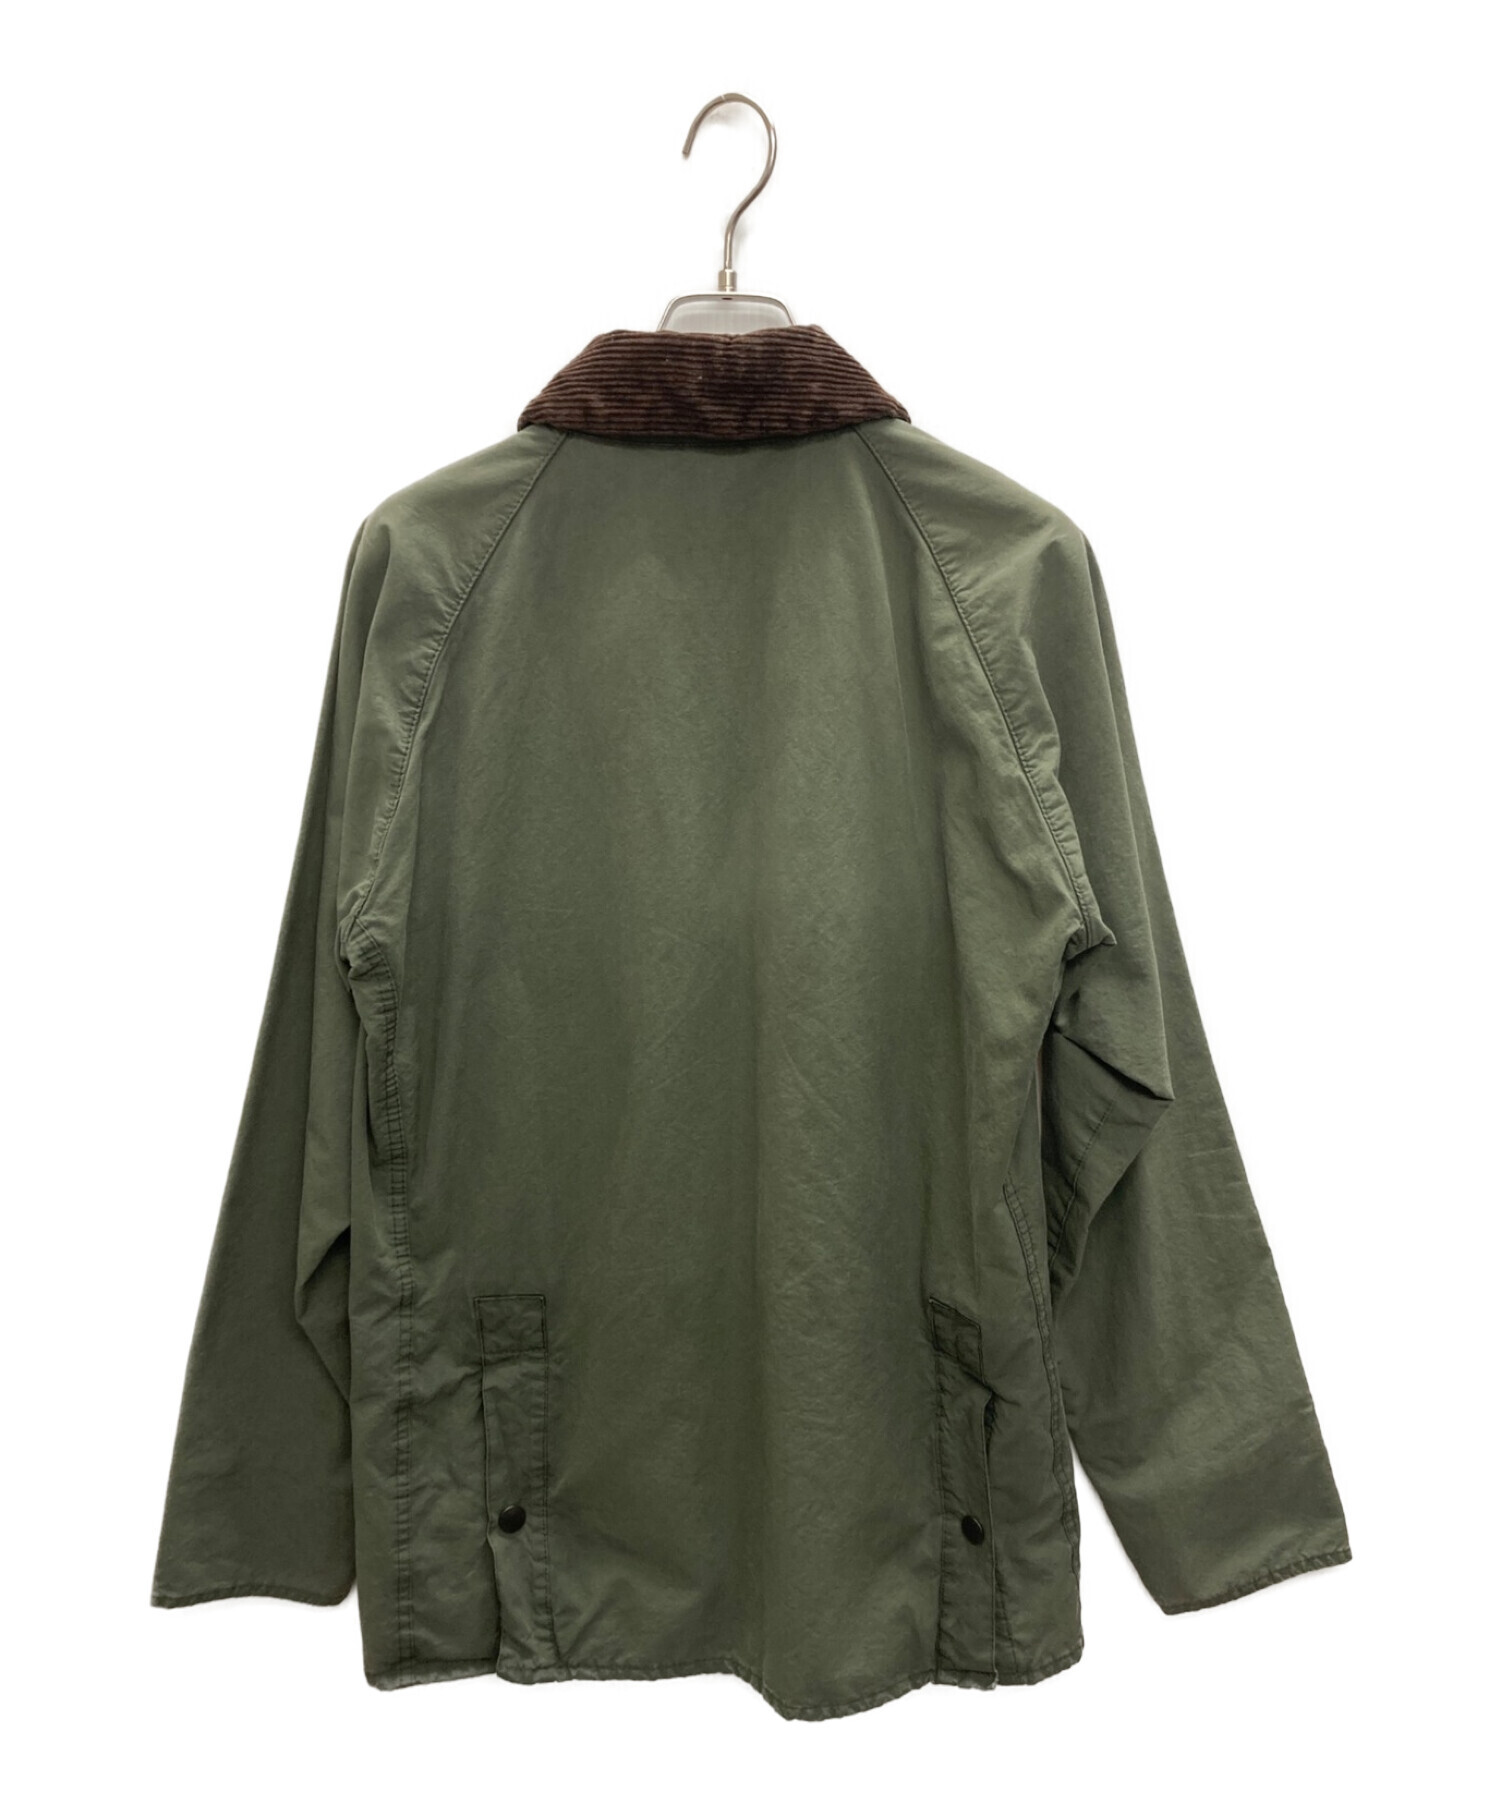 Barbour SL BEDALE size38 - ジャケット・アウター